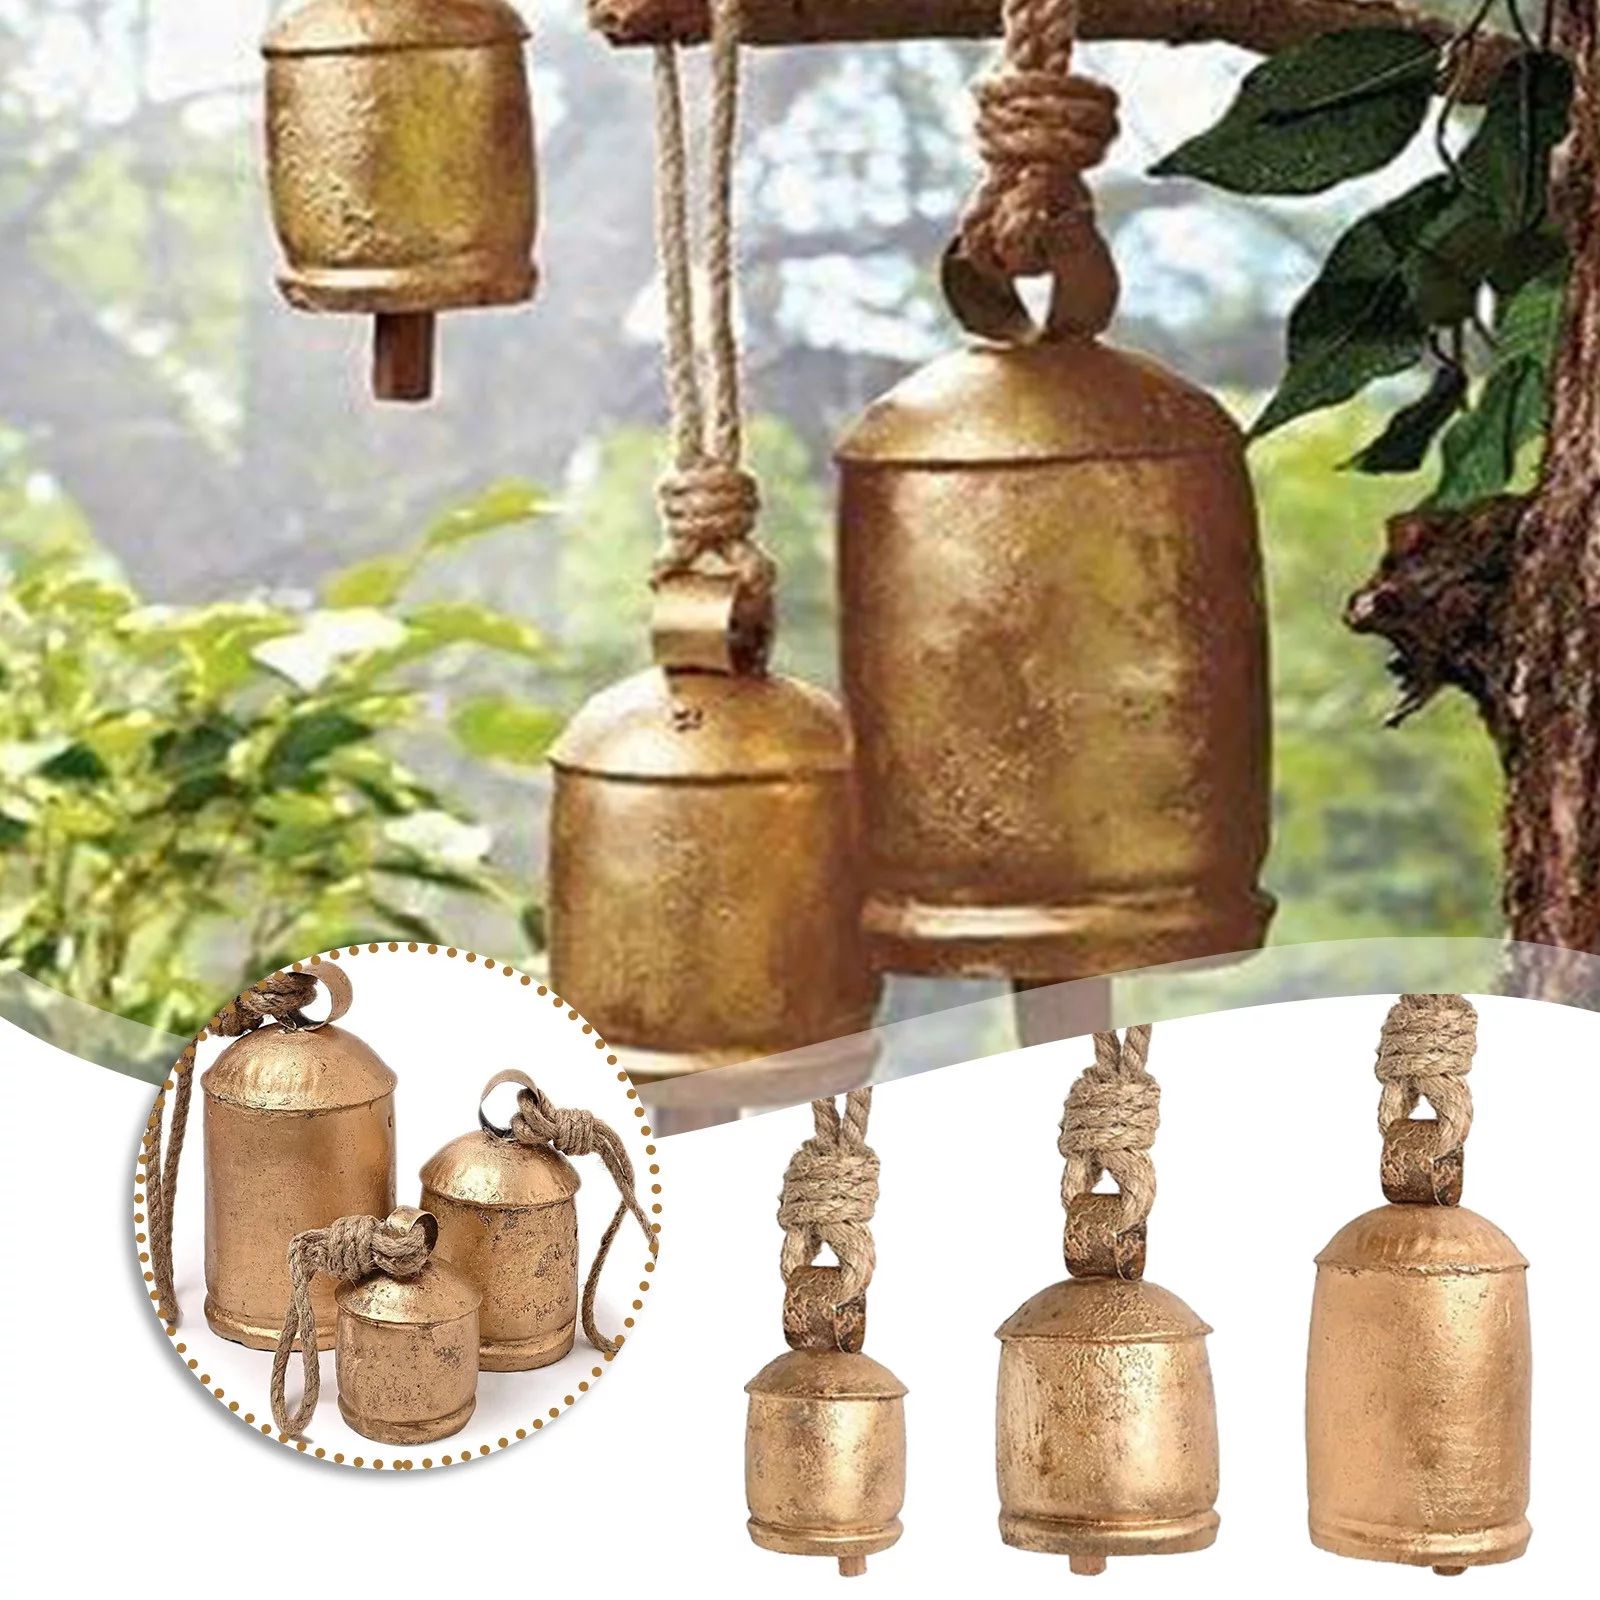 LINMOUA Worn And Chic- Country- Style Hanging Harmonious Giant Cow Bell 3-piece Set (1.5)1.5 star... | Walmart (US)